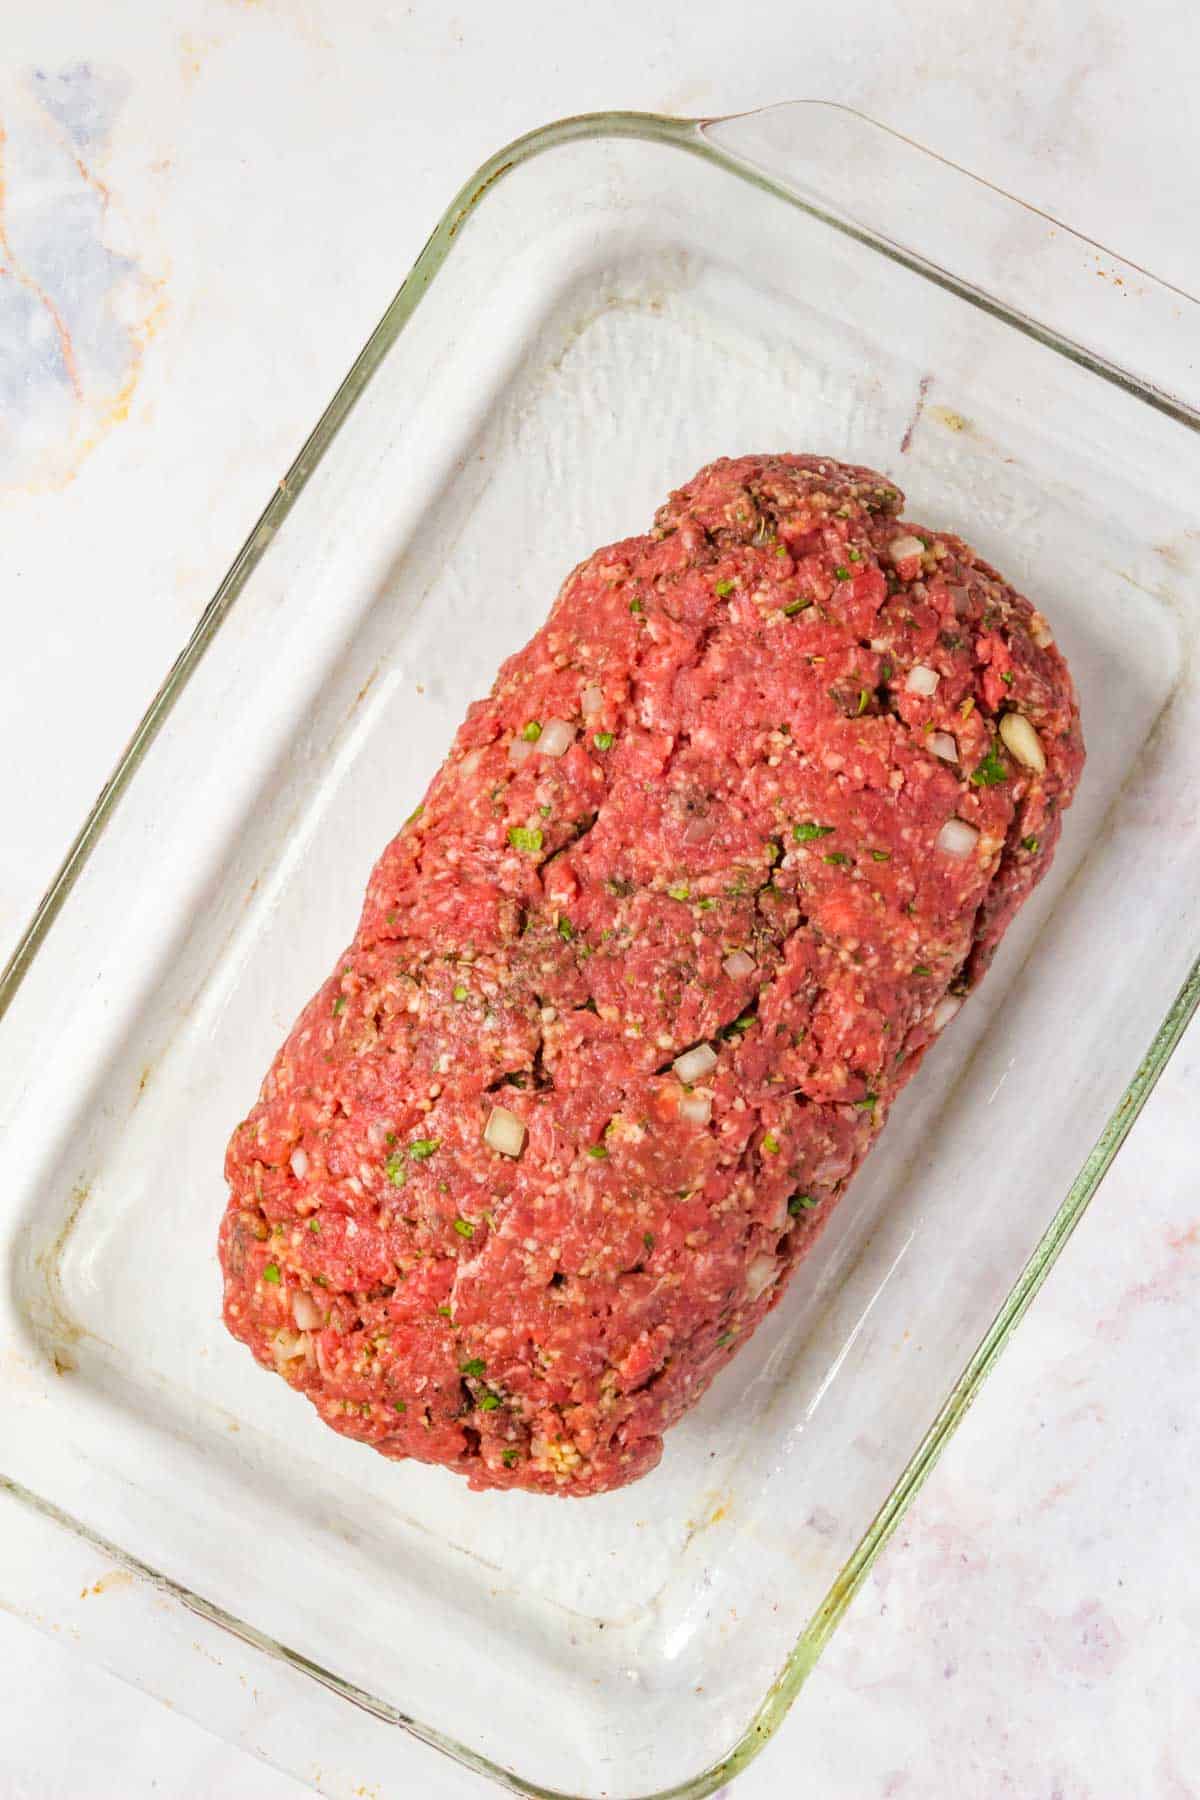 The sealed raw meatloaf inside of a large glass baking dish